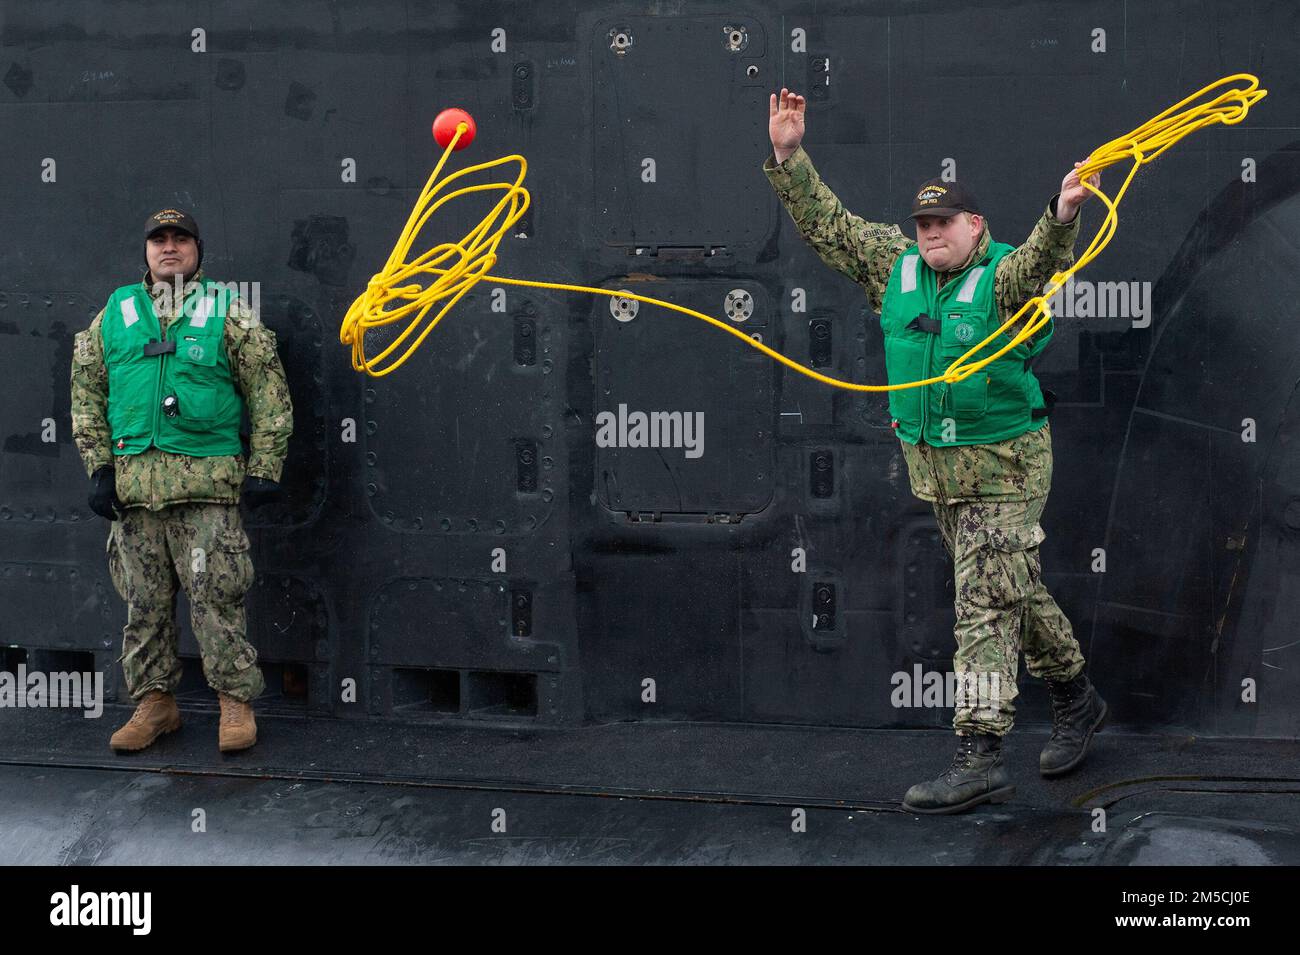 Sonar Technician (Submarines) 3rd Class Dylan Carpenter throws lines while Fire Control Technican 2nd Class Martin Varela looks on moments after the future USS Oregon (SSN 793) arrived at Submarine Base New London in Groton, Conn., for the first time on Tuesday, March 1, 2022.  When commissioned in the coming months, Oregon will be the third U.S. Navy vessel to be named for the 33rd state and will be the 20th Virginia class submarine. Stock Photo